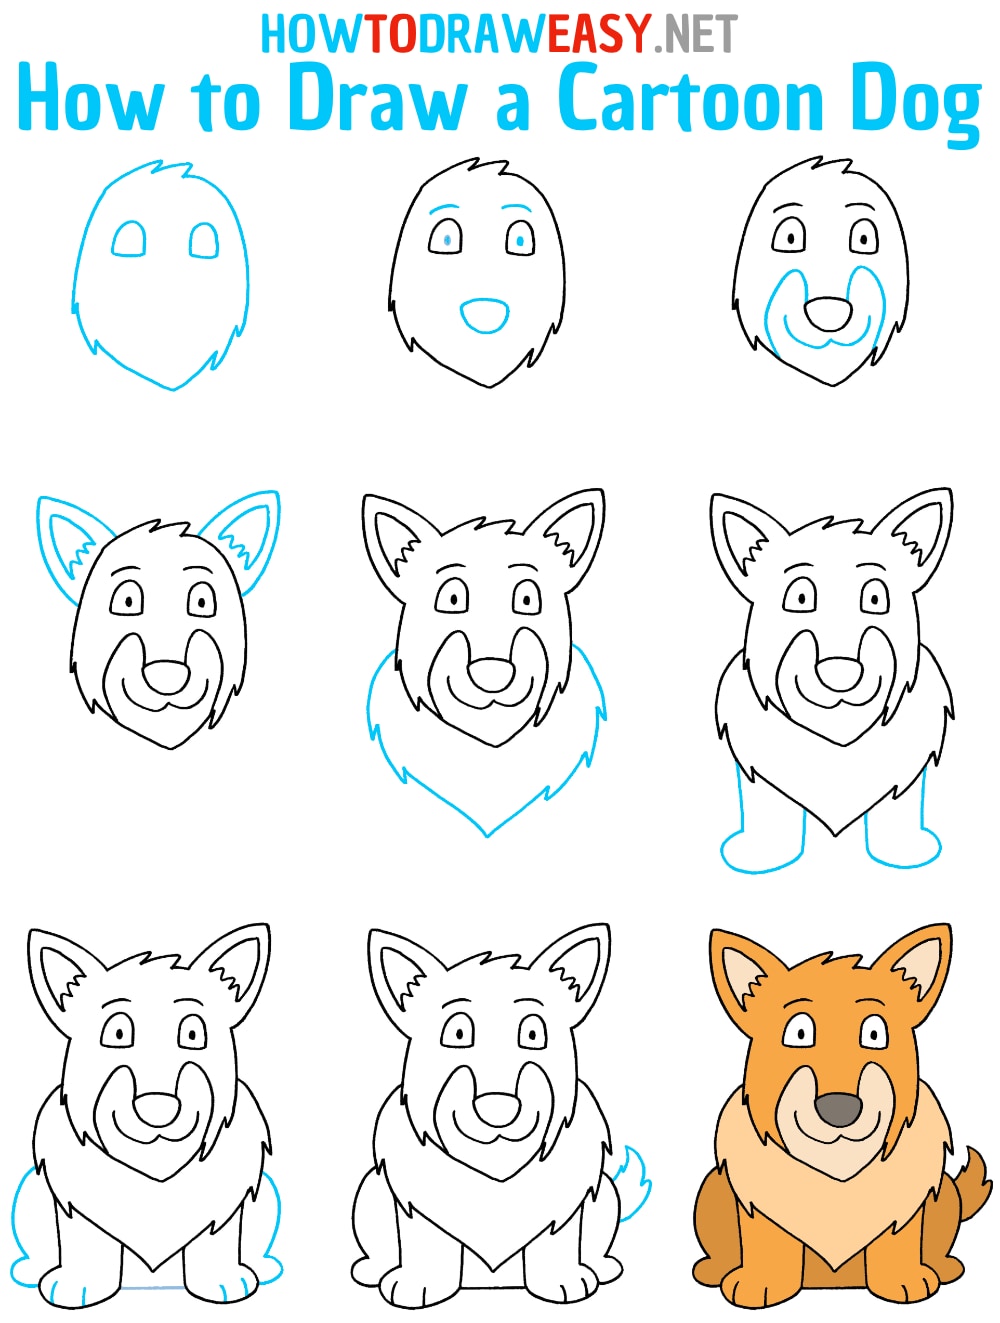 How to Draw a Cartoon Dog Step by Step